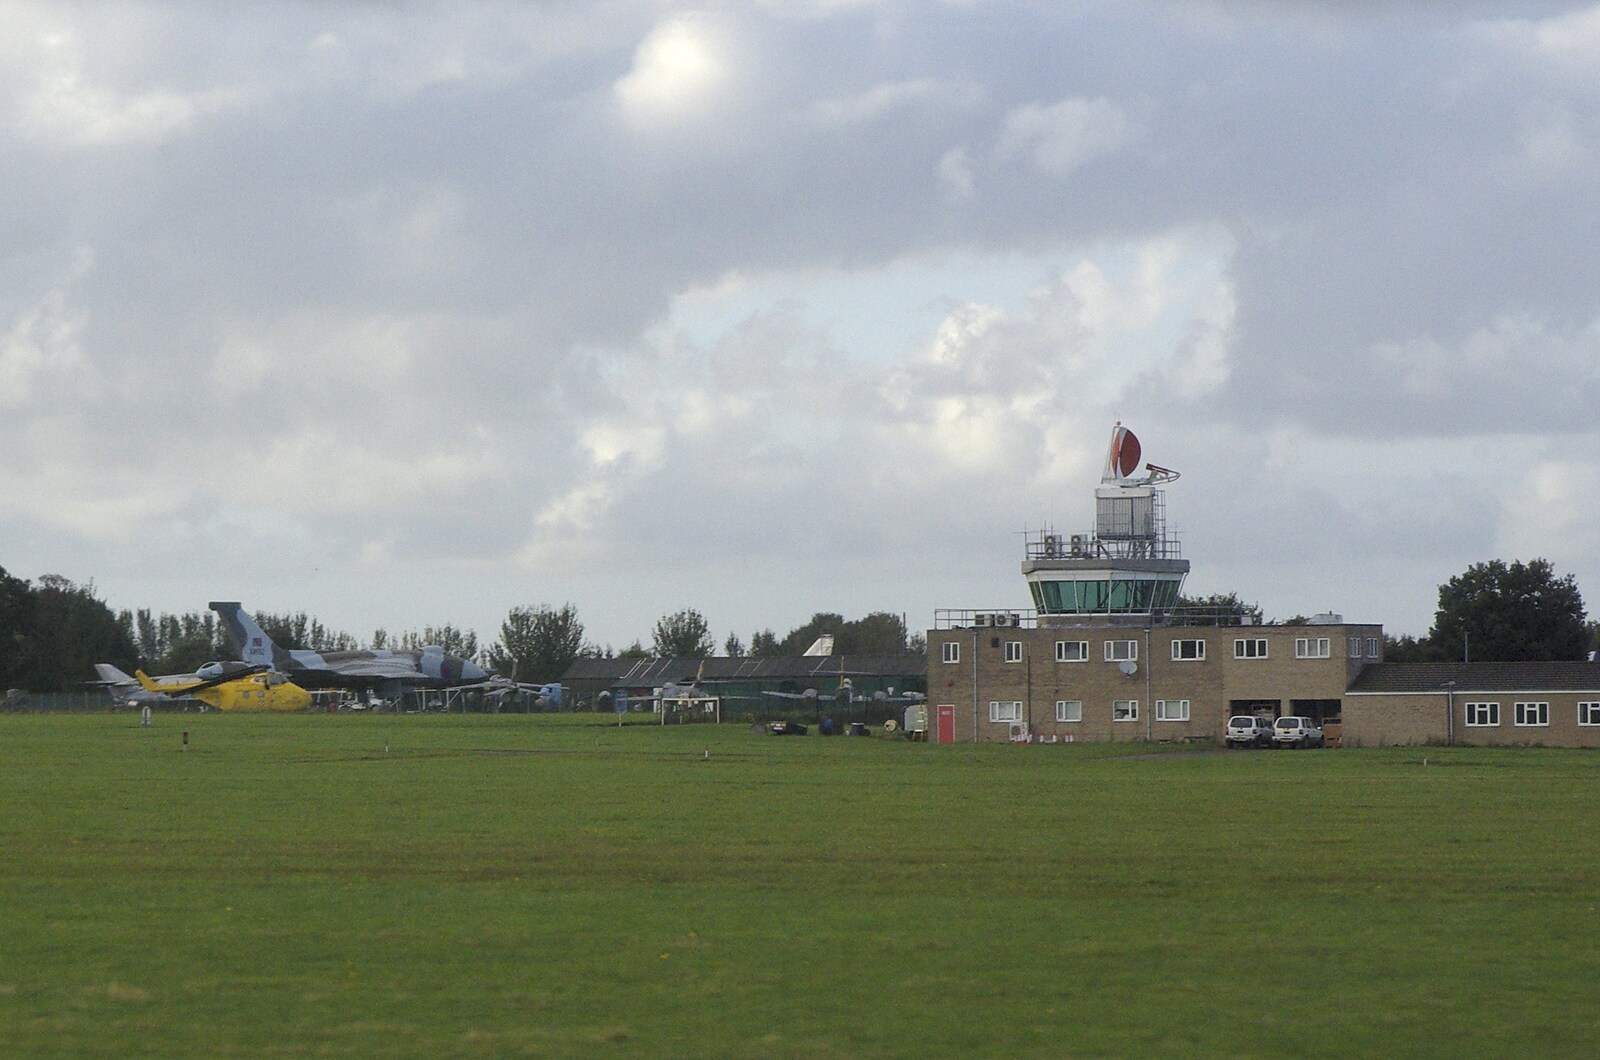 Norwich Airport and its old control tower from Blackrock and Dublin, Ireland - 24th September 2007